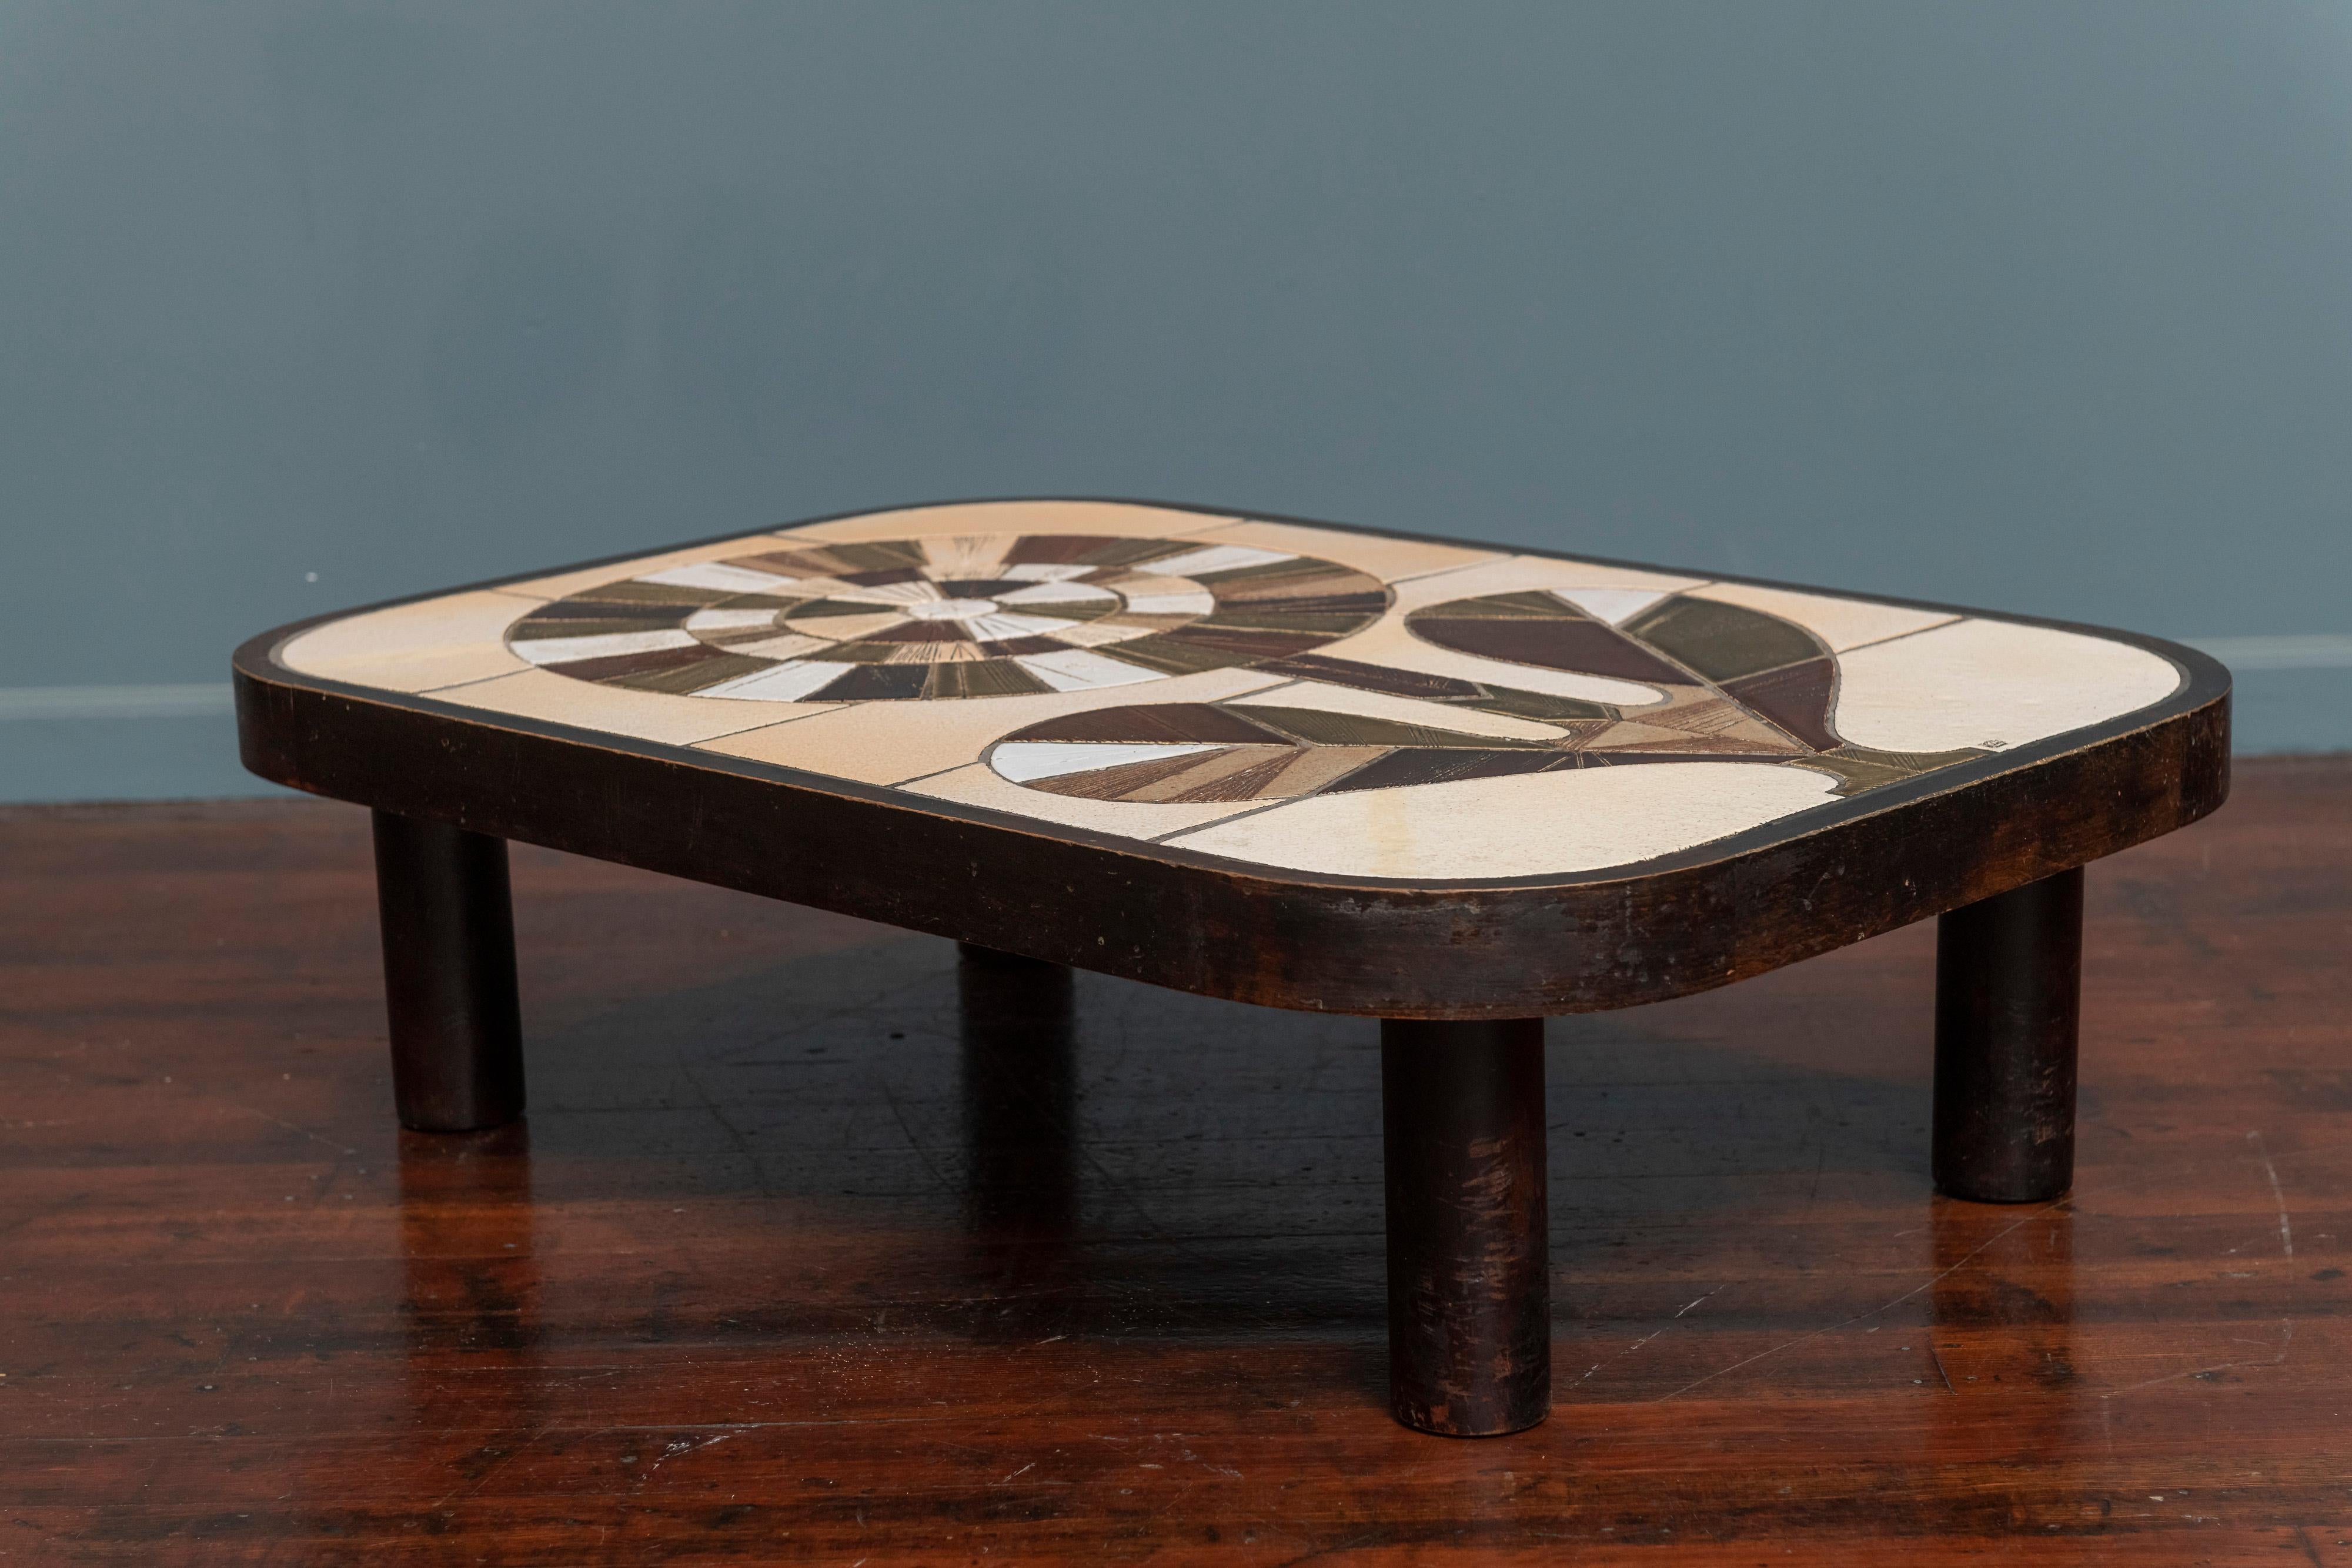 Roger Capron ceramic low coffee table, France. Bohemian chic studio craft tile top coffee table by Roger Capron, signed. In very good vintage condition with signs of wear to the stained bentwood frame and four cylindrical legs.